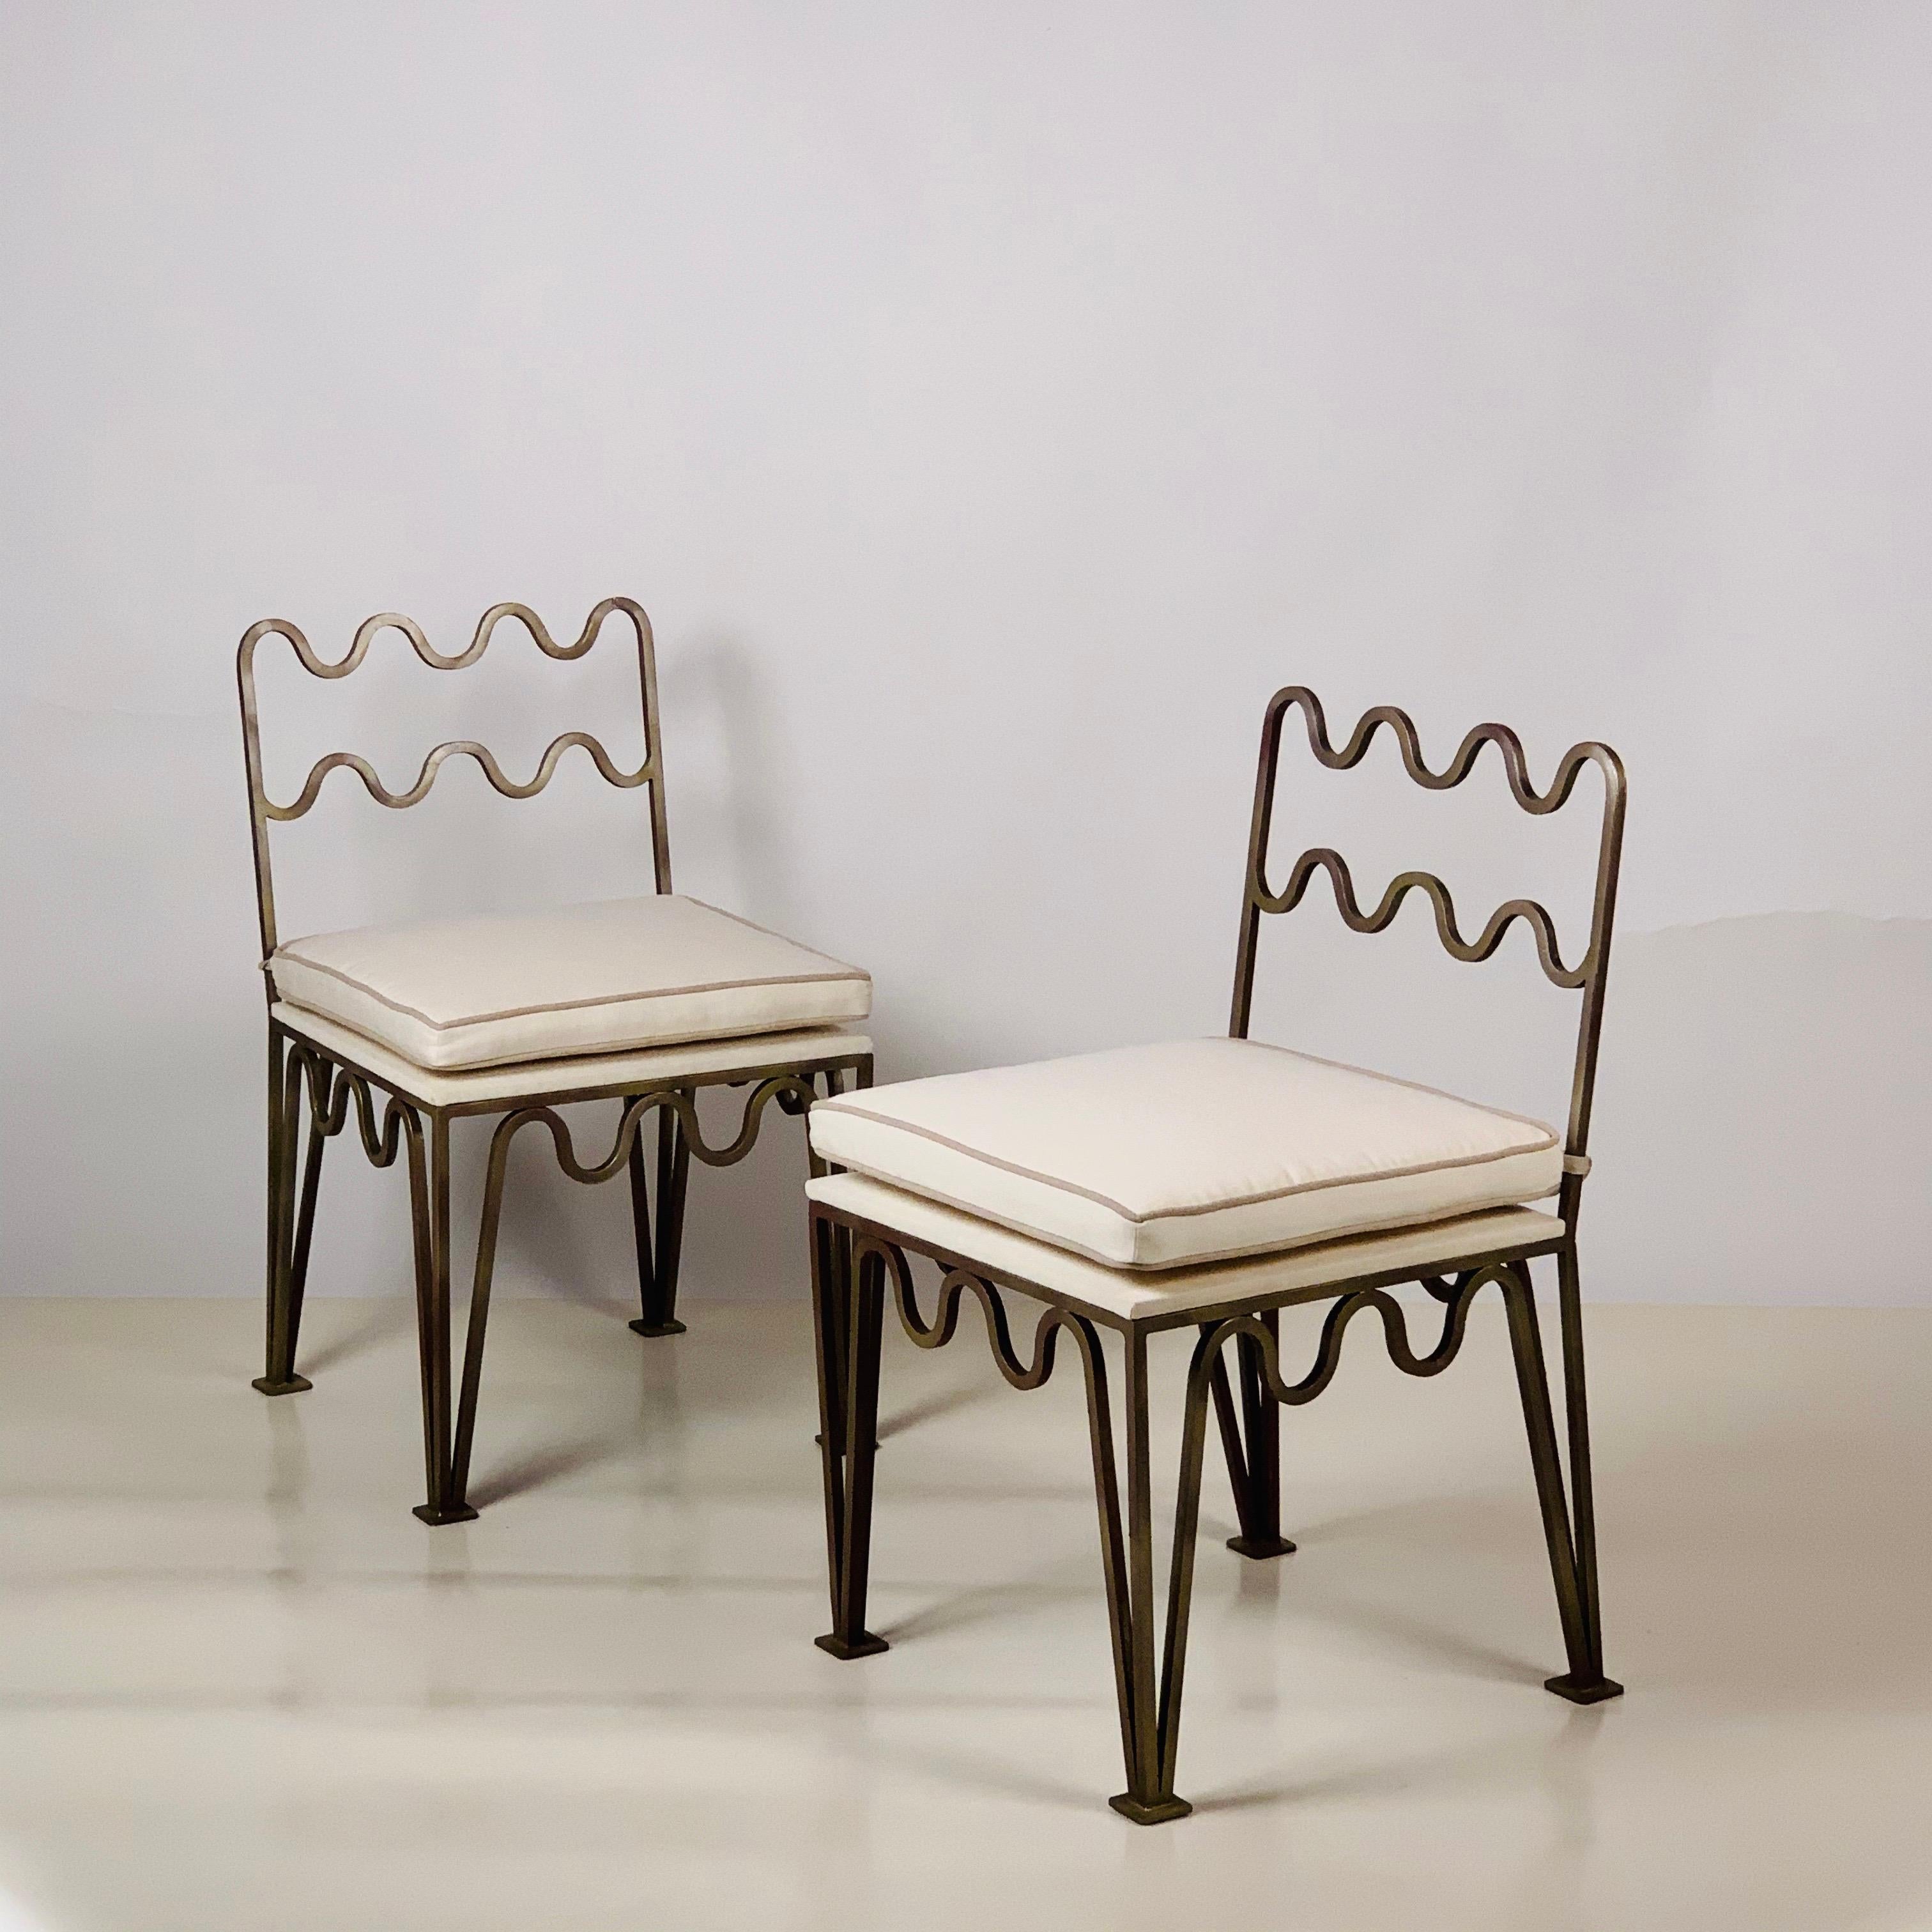 Pair of chic undulating 'Méandre' side chairs by Design Frères.

Bronzed steel frames. Natural linen upholstered cushions.

These Méandre™ chairs from our exclusive Design Frères® line are handmade in our Los Angeles atelier by our skilled artisans.